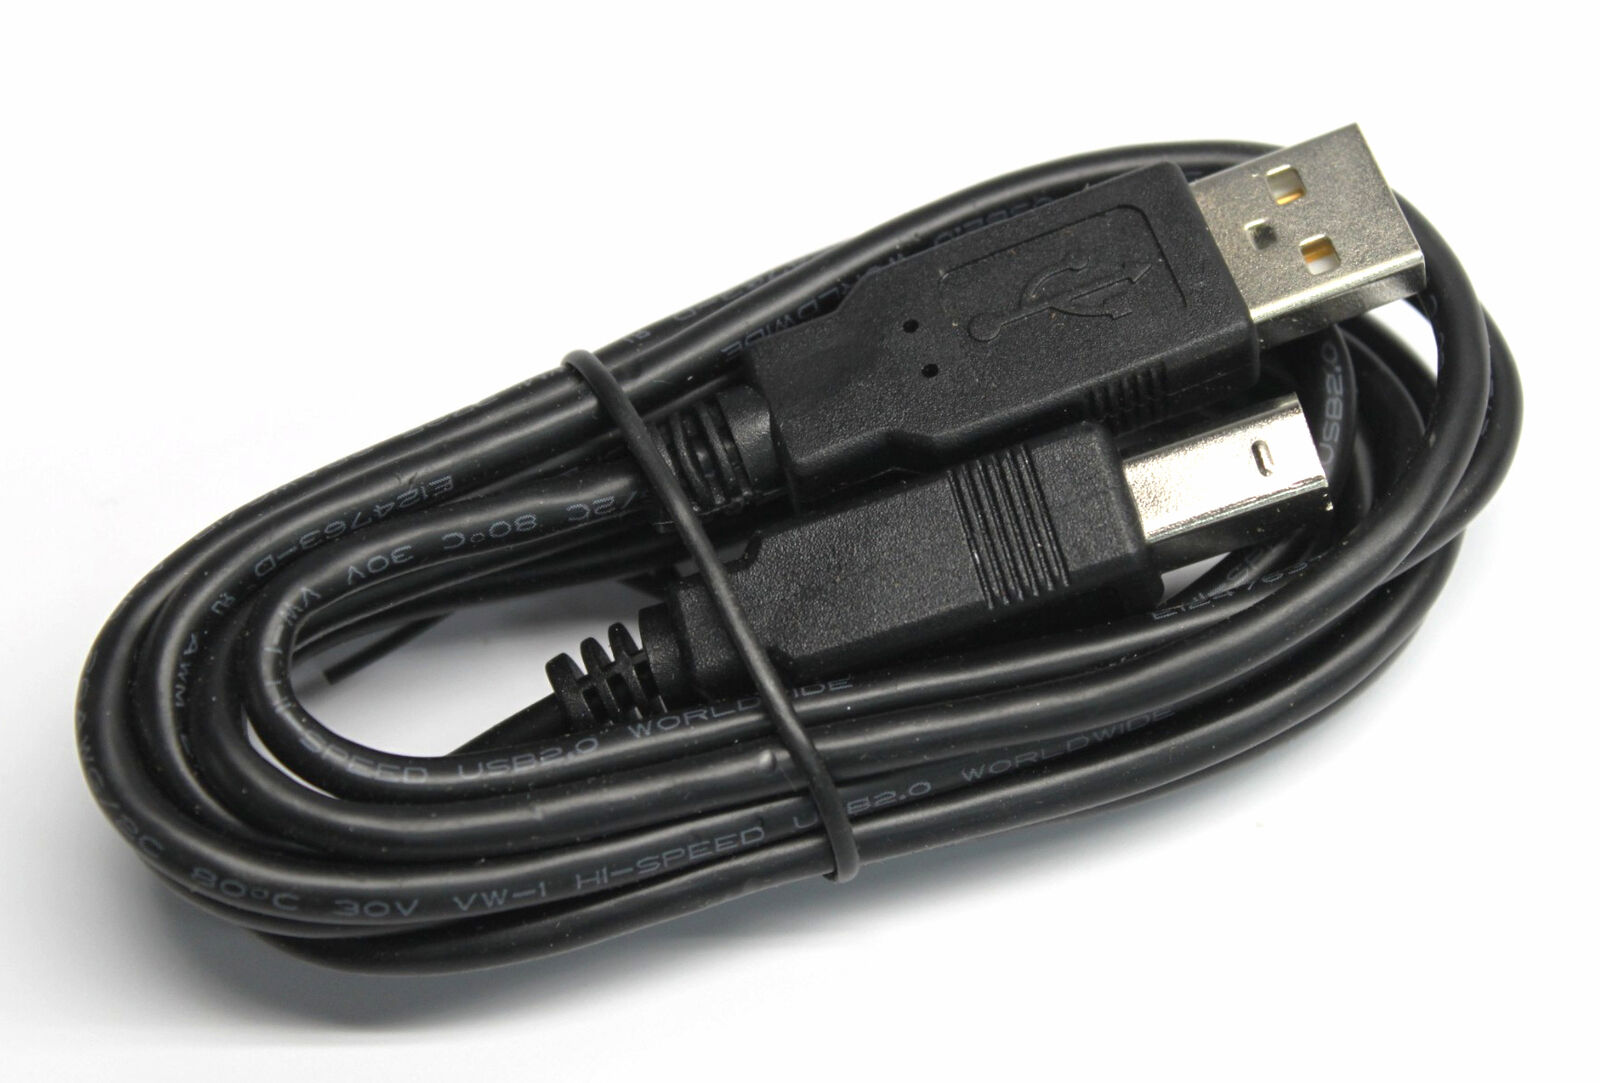 USB Cable Cord for HP Photosmart Computer PC to 100 1115 145 230 245 Printers